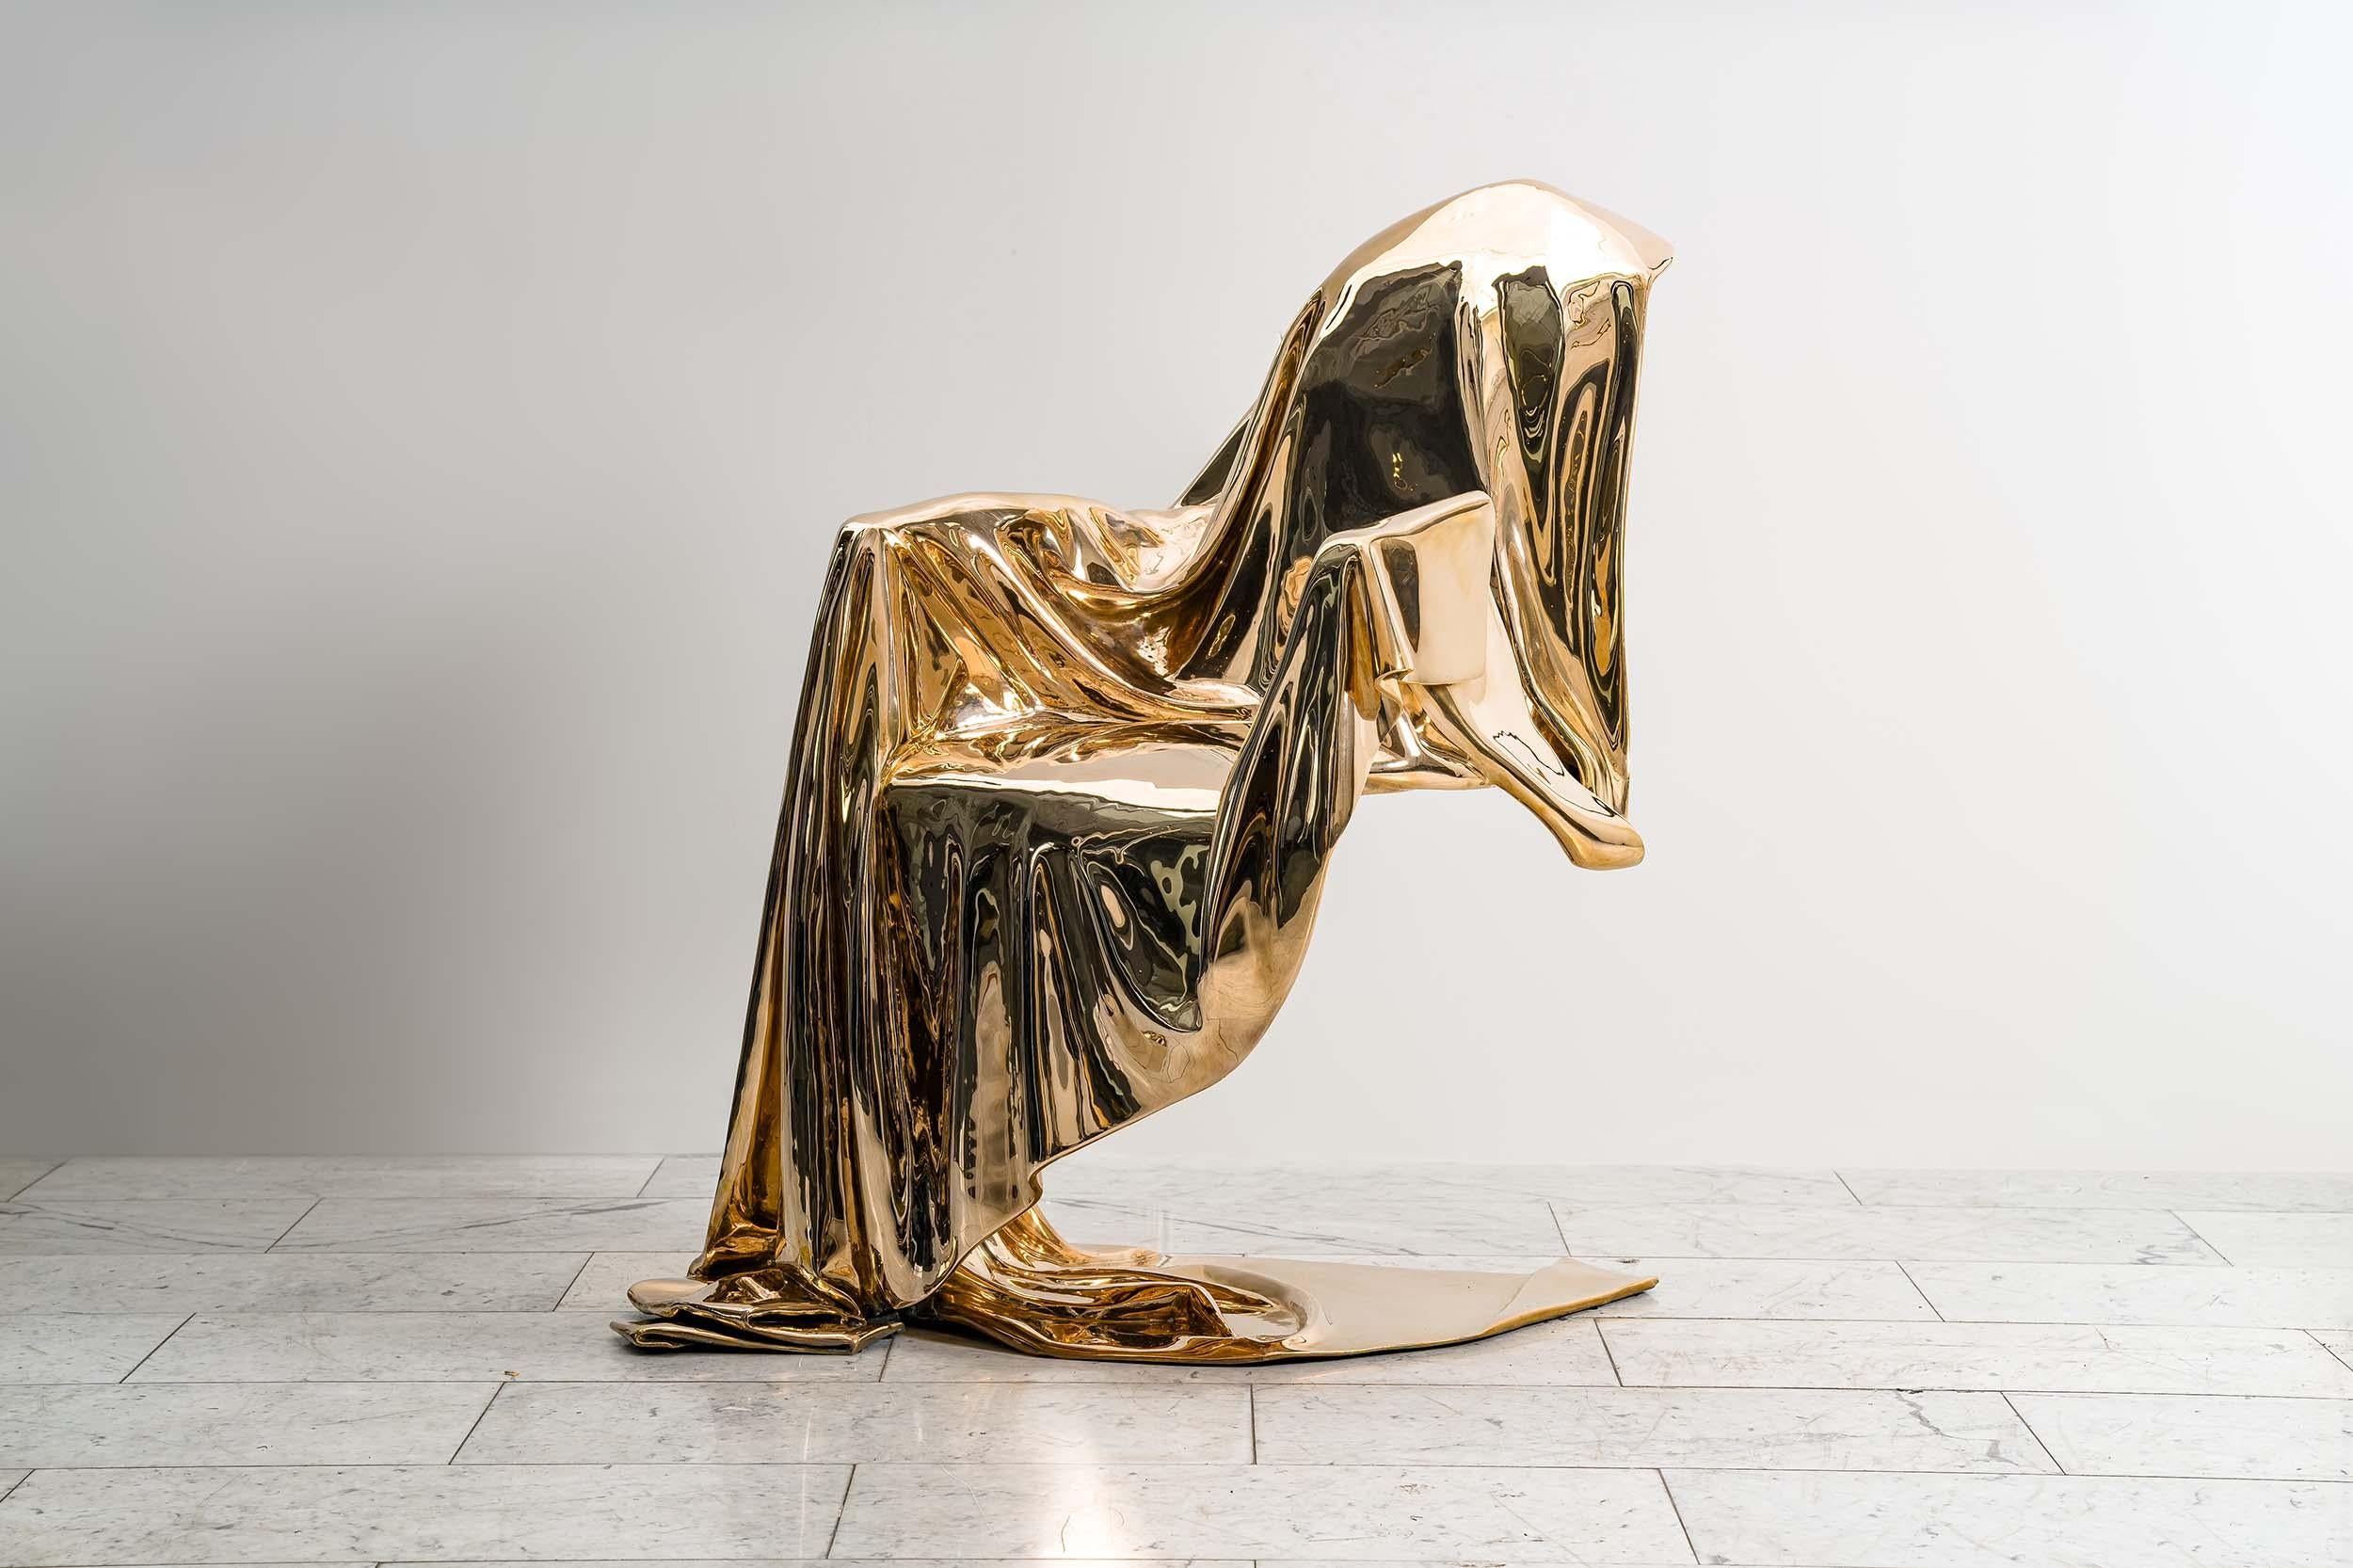 In this remarkable armchair, a masterwork of artistic ingenuity and technical virtuosity, we bear witness to an exquisite fusion of form, materiality, and conceptual depth. Crafted entirely from cast bronze, its mirror polish finish evokes an